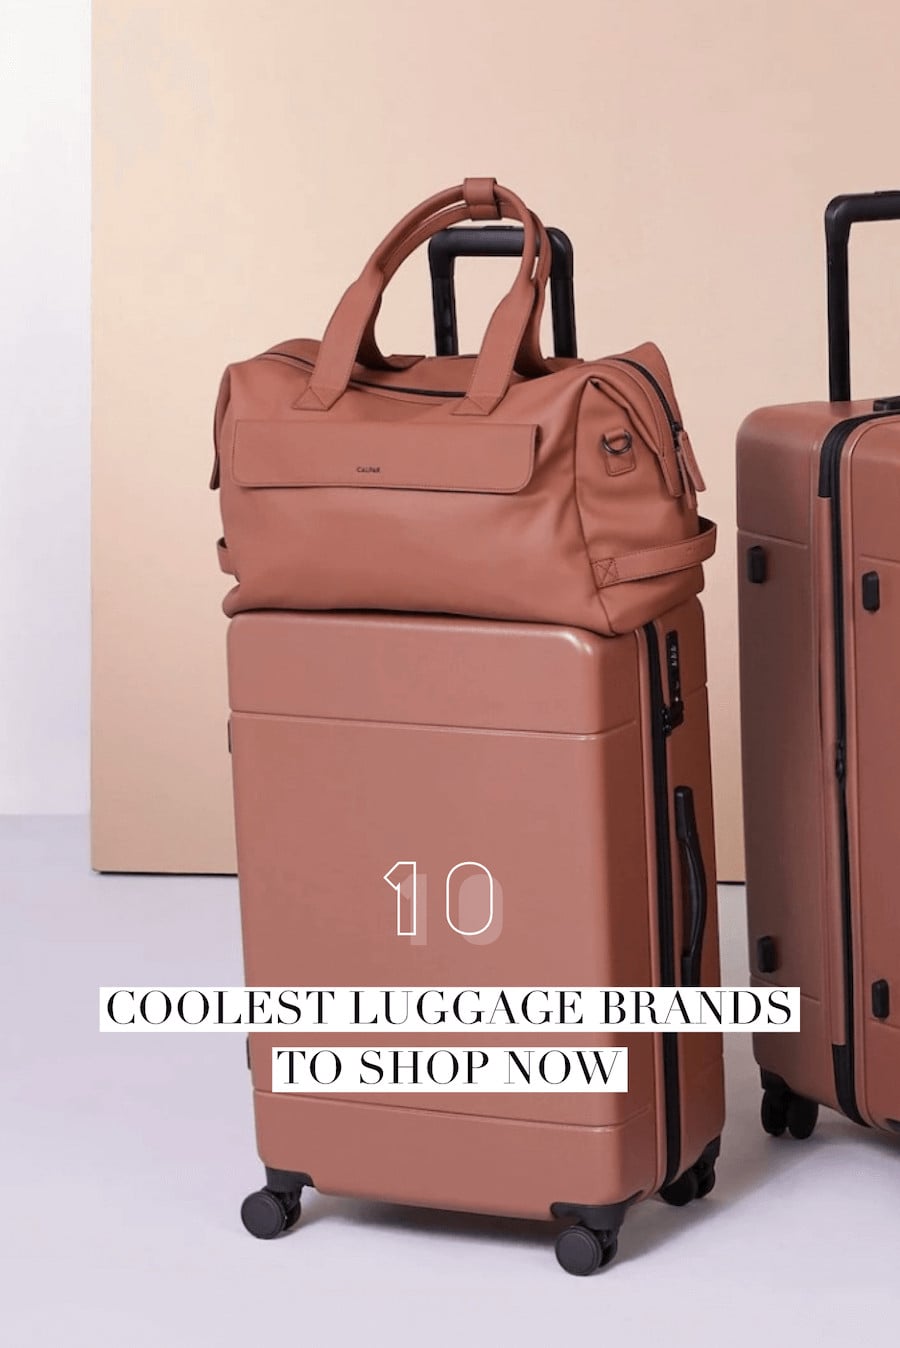 The Things We Carry: Luggage Is This Year's Hottest Fashion Accessory